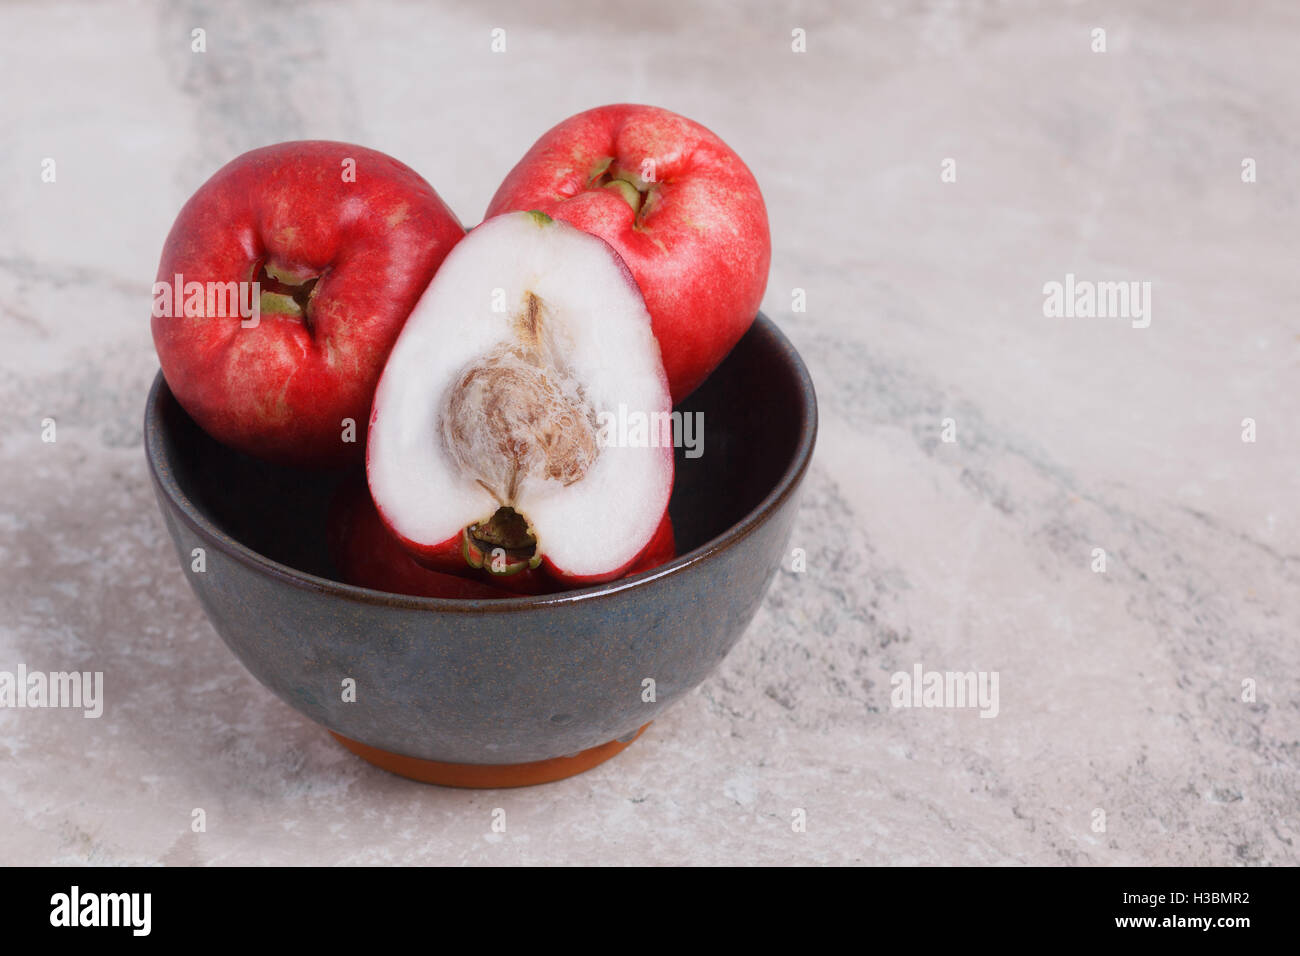 Tropical fruit Acmella oleracea (toothache plant, paracress, electric daisy, jambu) in bowl on marble table. Stock Photo